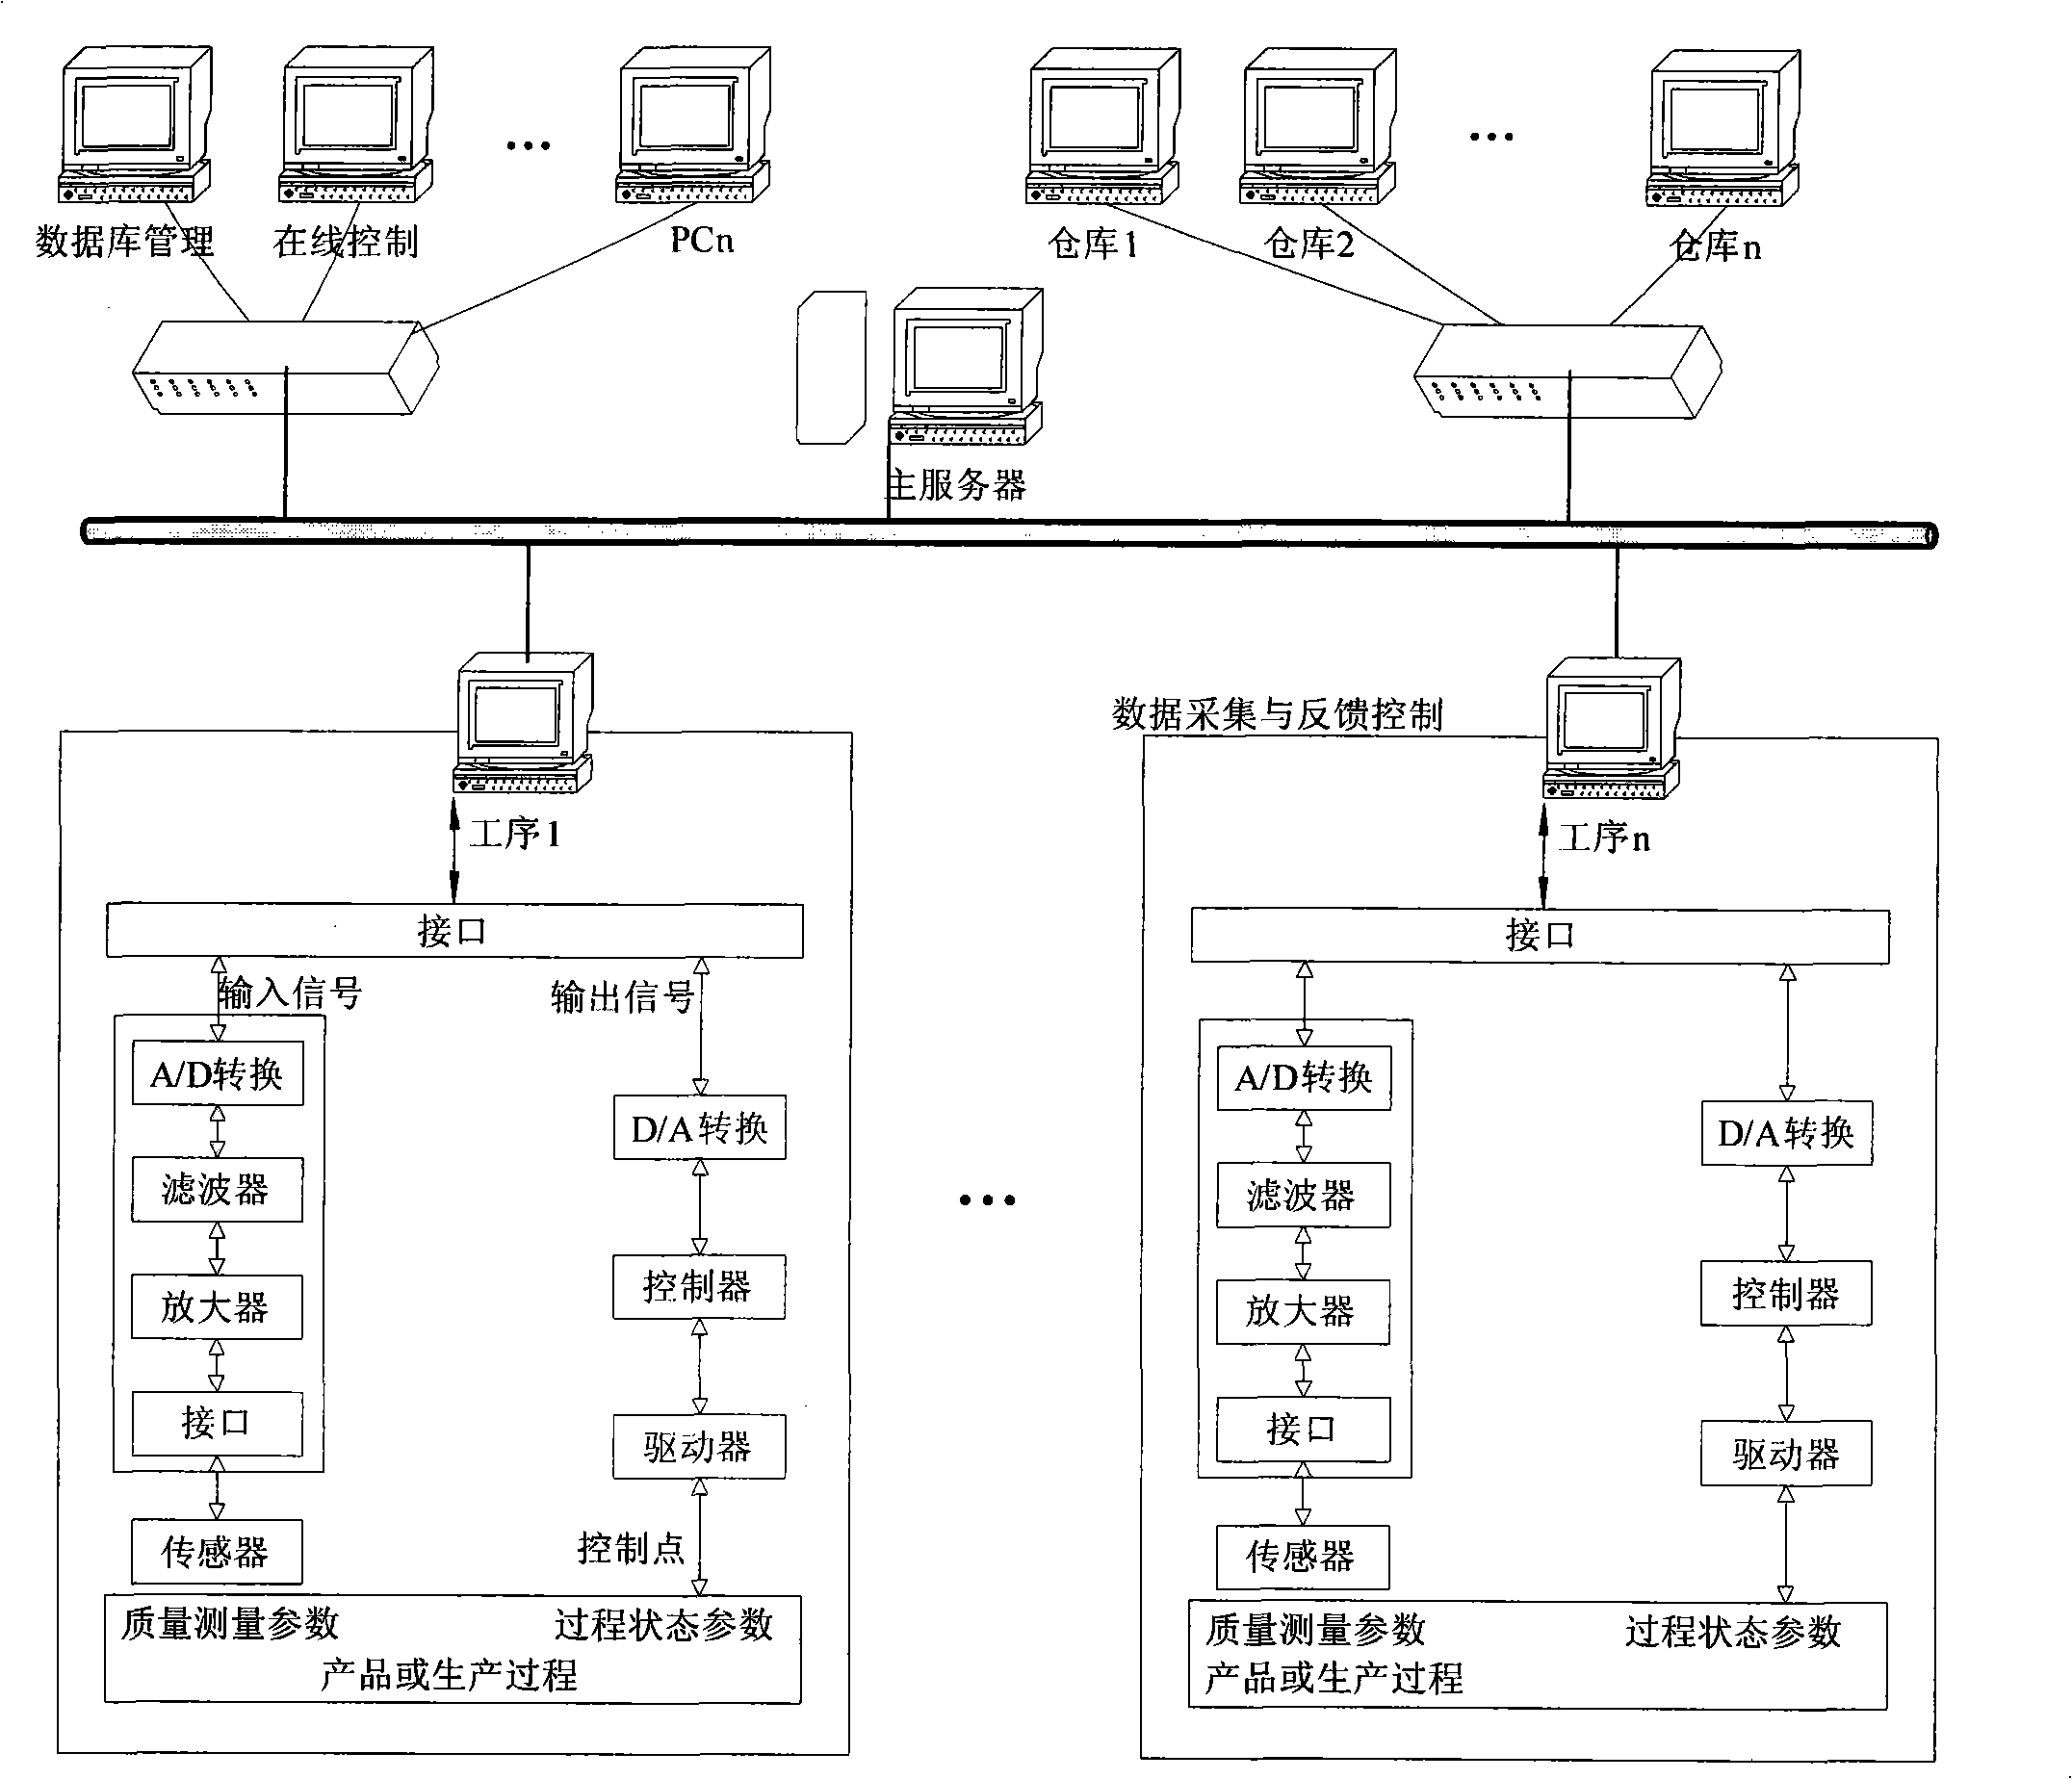 Product quality prediction technique for recombination assembly line